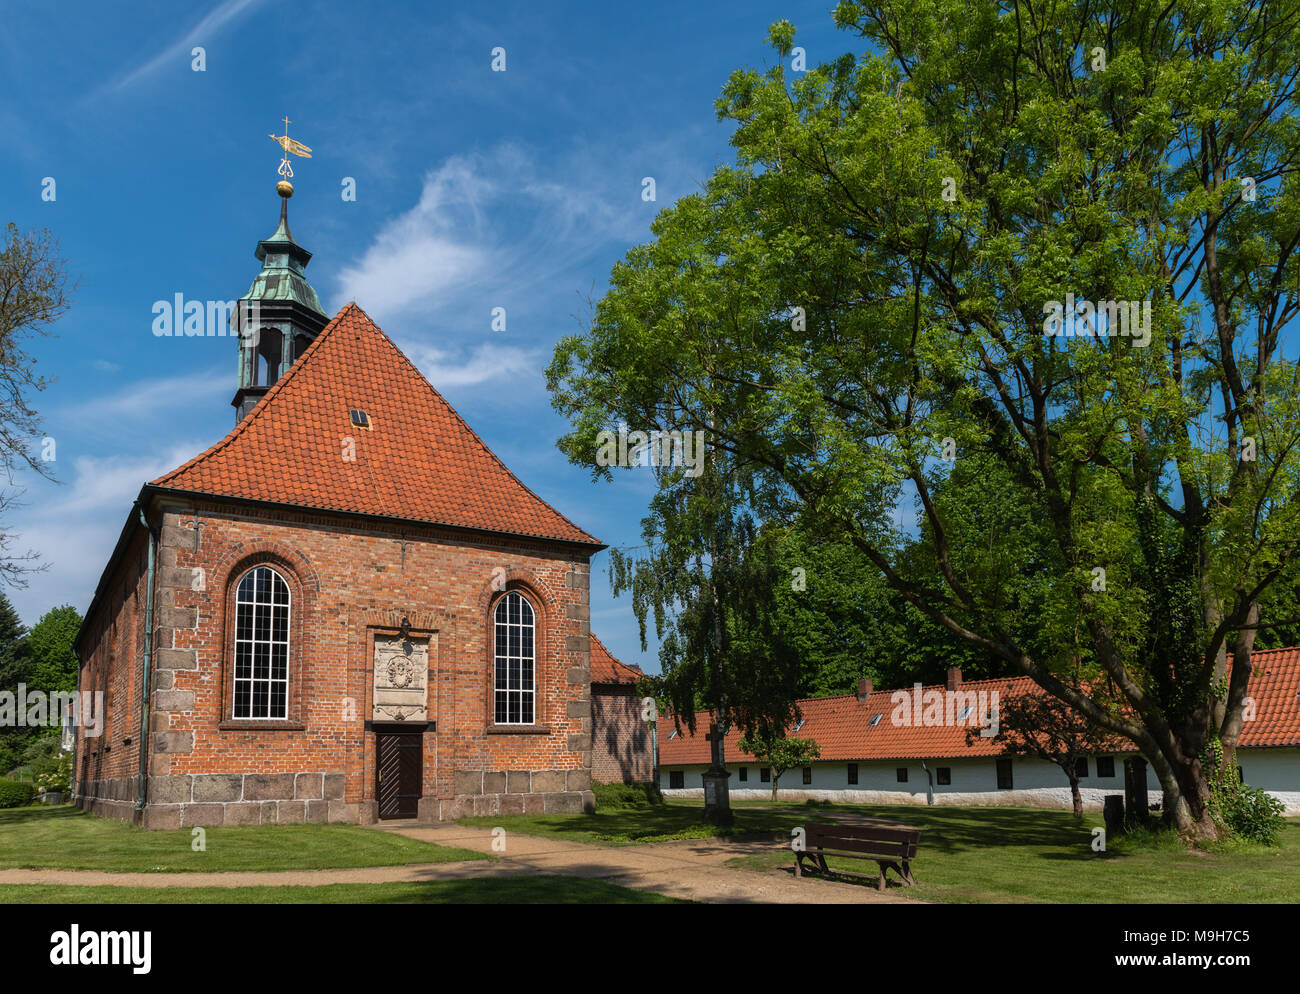 Historic castle church with almshouses on its sides for the poor and sick, Ahrensburg, Storman, Schleswig-Holstein, Germany, Europe Stock Photo